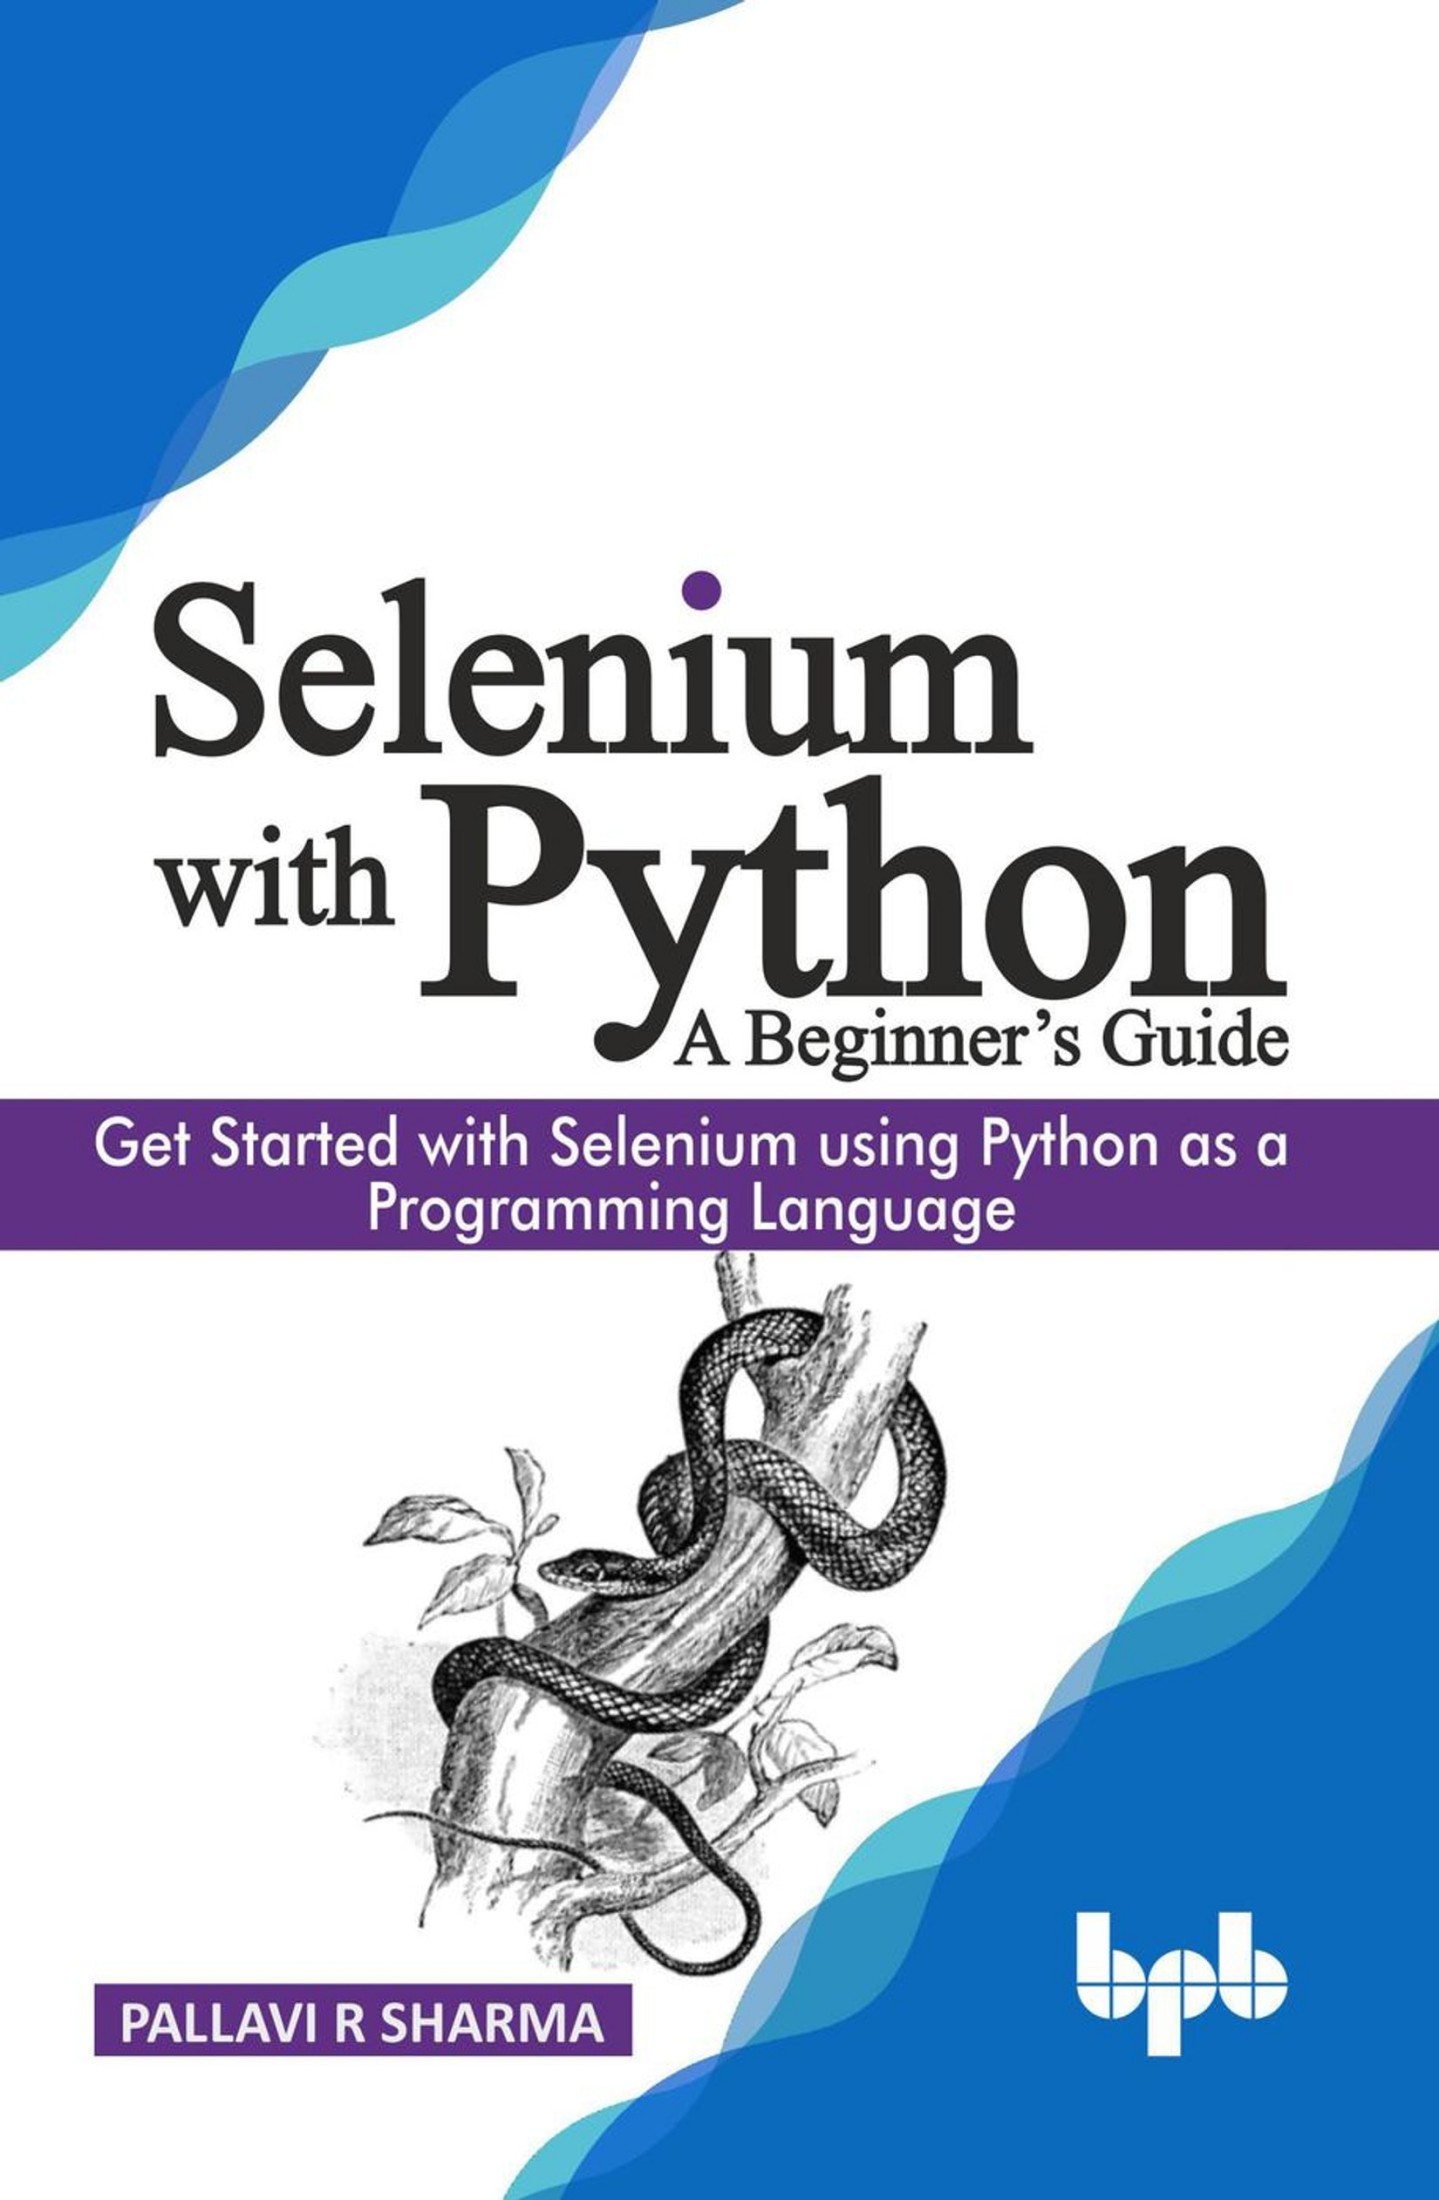 Selenium with Python - A Beginner’s Guide